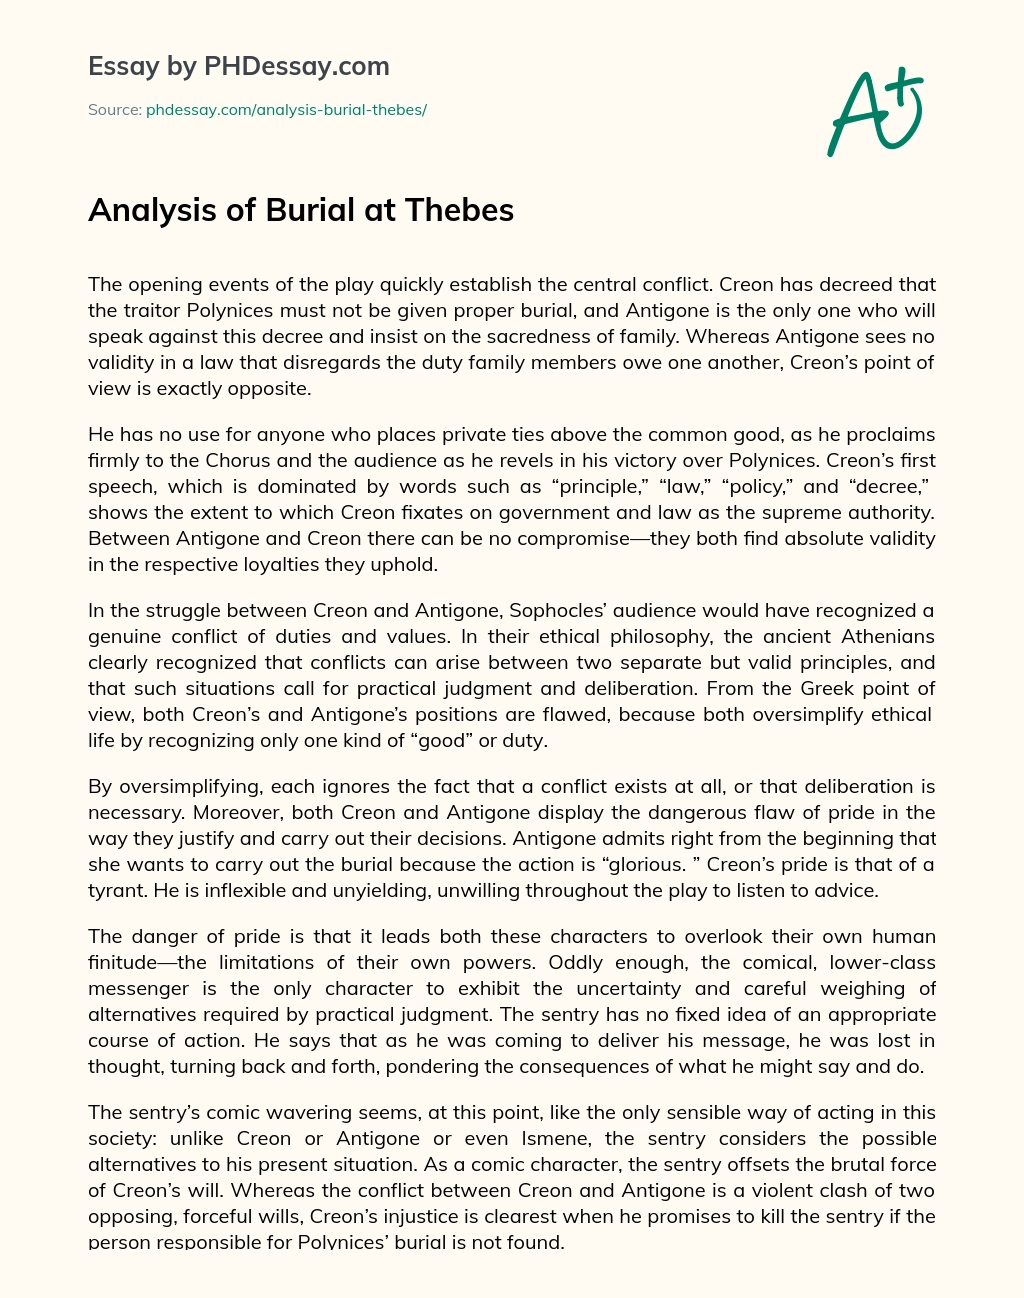 Analysis of Burial at Thebes essay